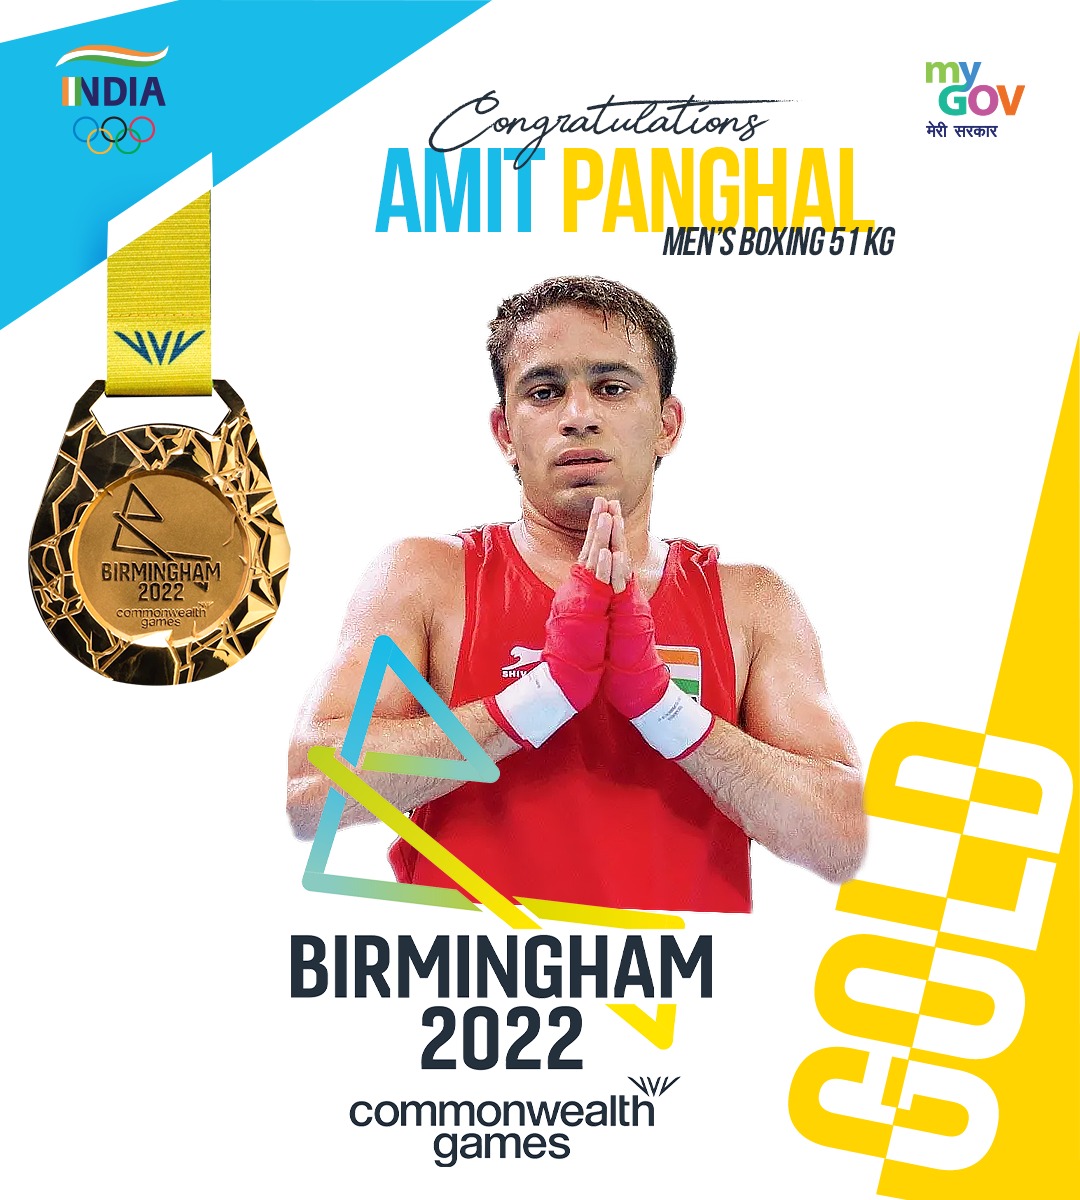 Andddd it's raining GOLD at #CWG2022!🥇

Well done, #NituGhanghas & @Boxerpanghal! 🇮🇳

India is super proud of you! 😍 #CheerForIndia #YuvaShakti #B2022